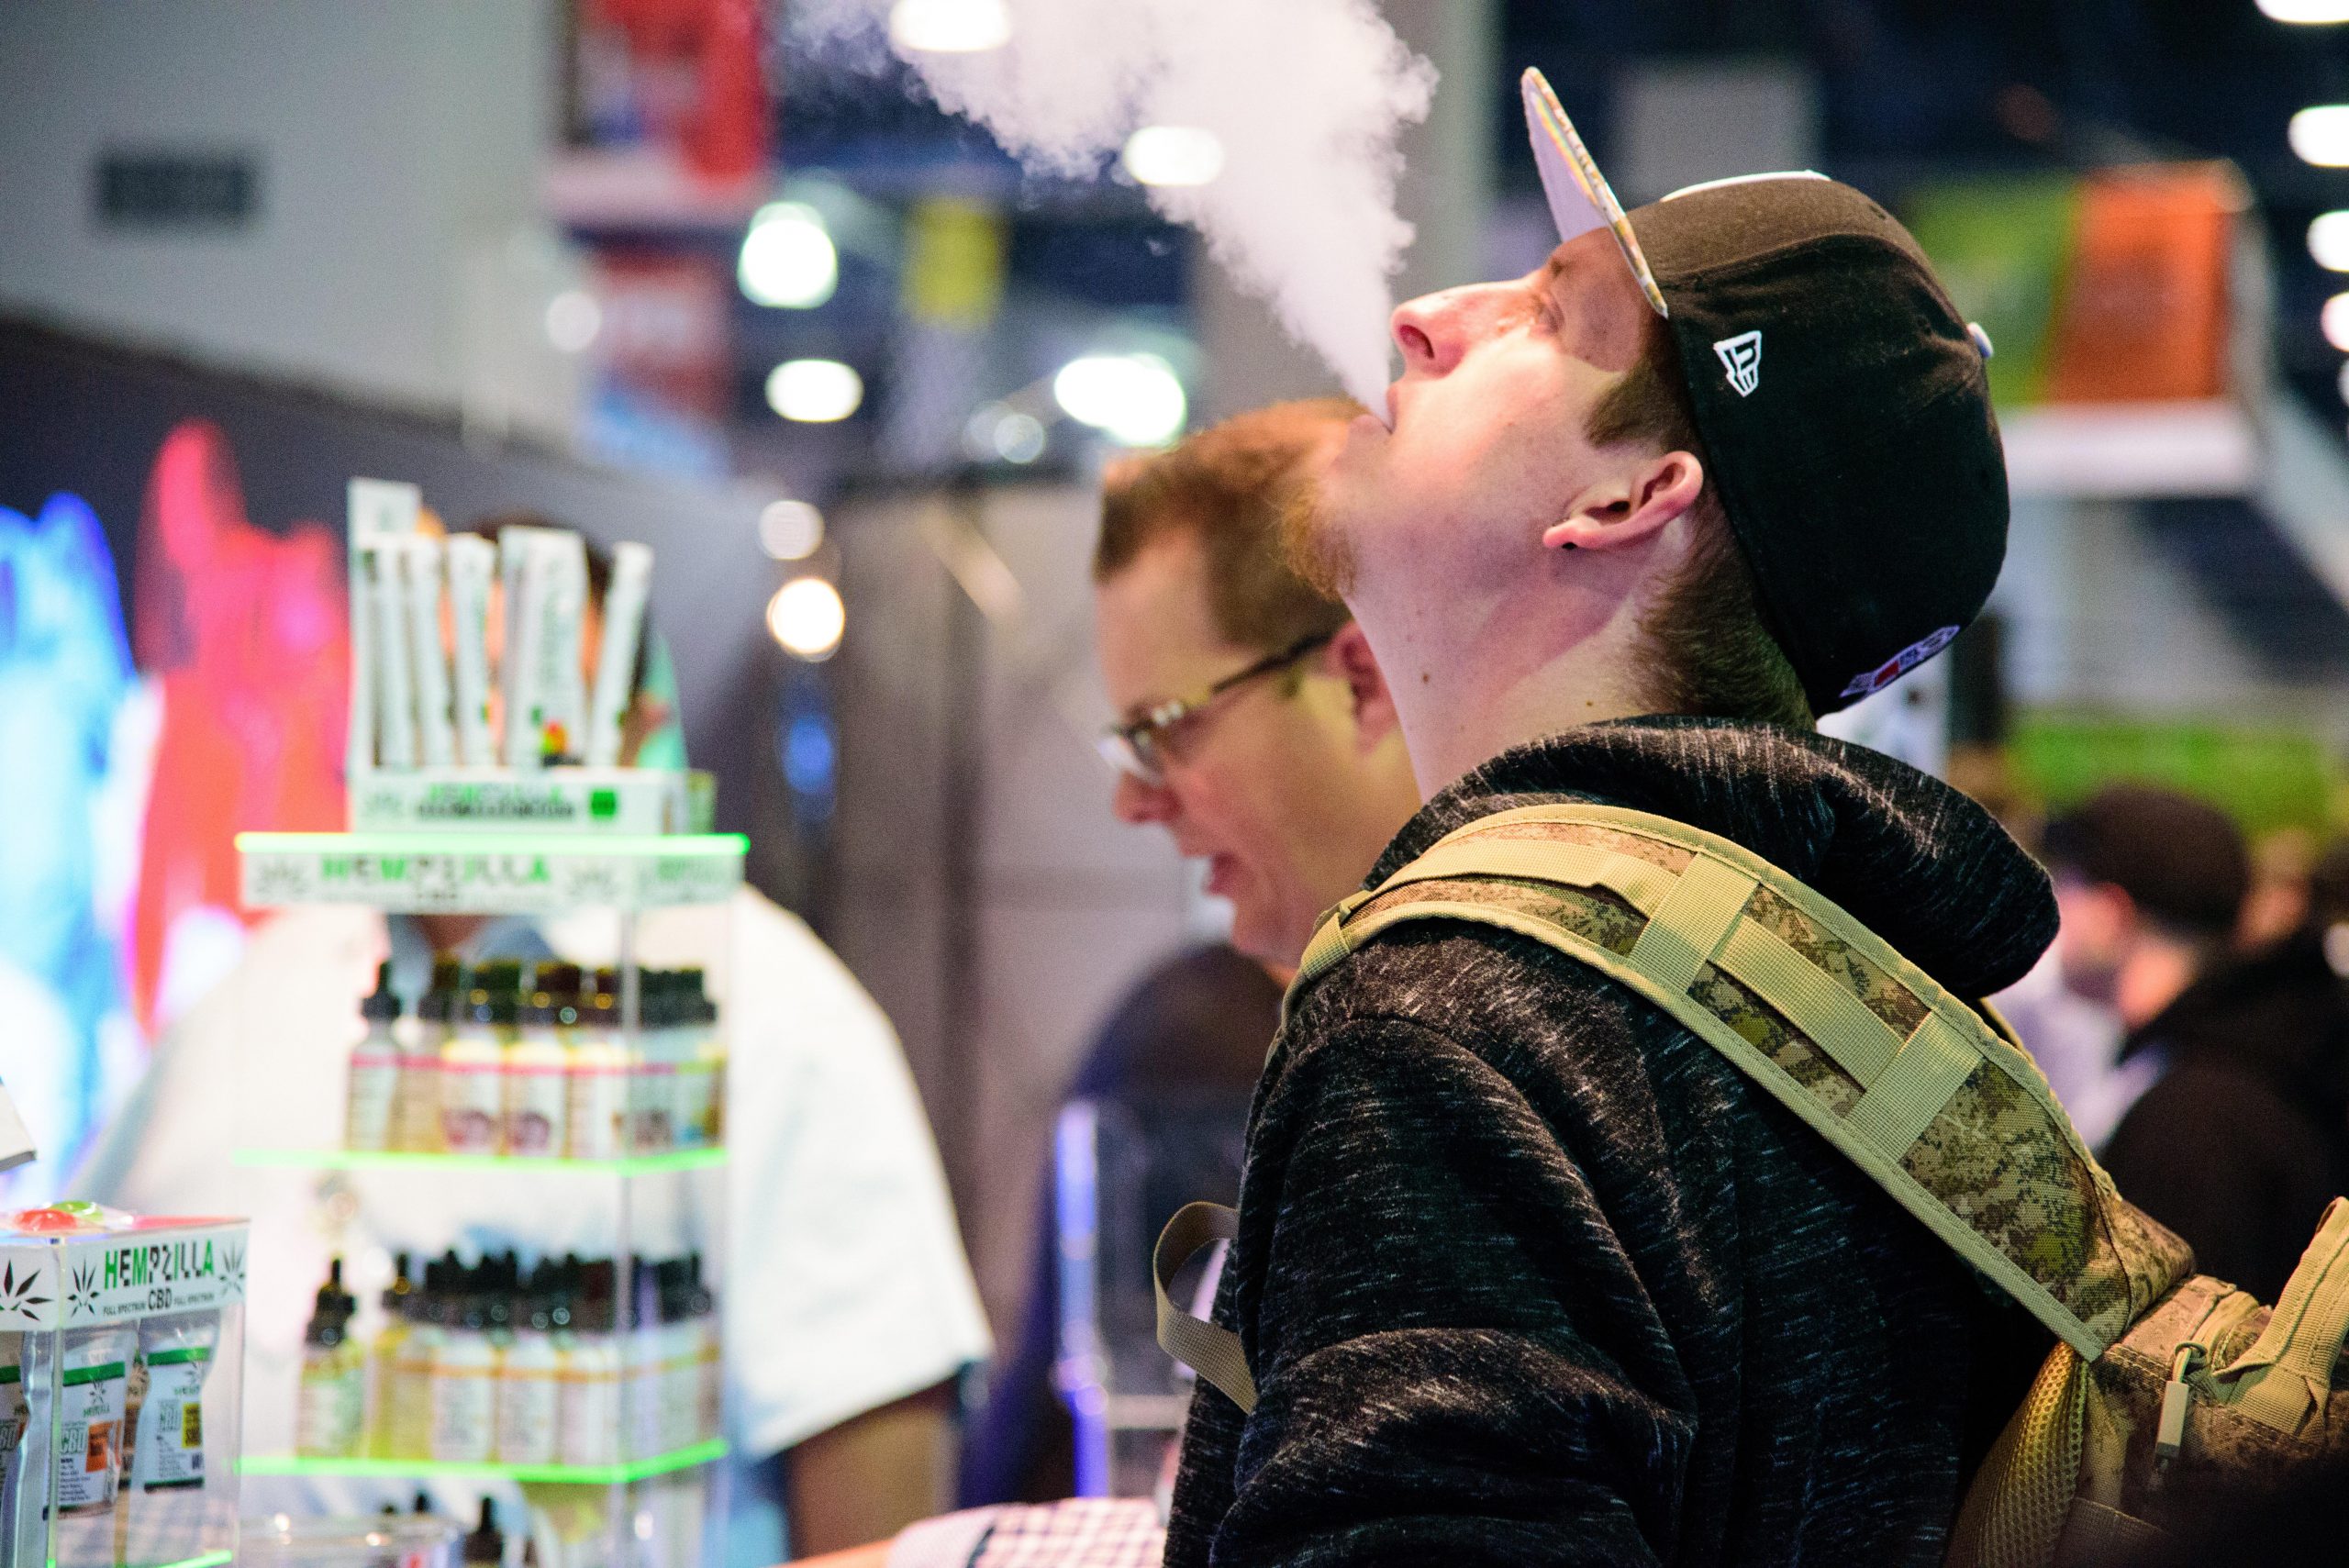 E-cigarette shops to close in Spain within five years once new law comes in